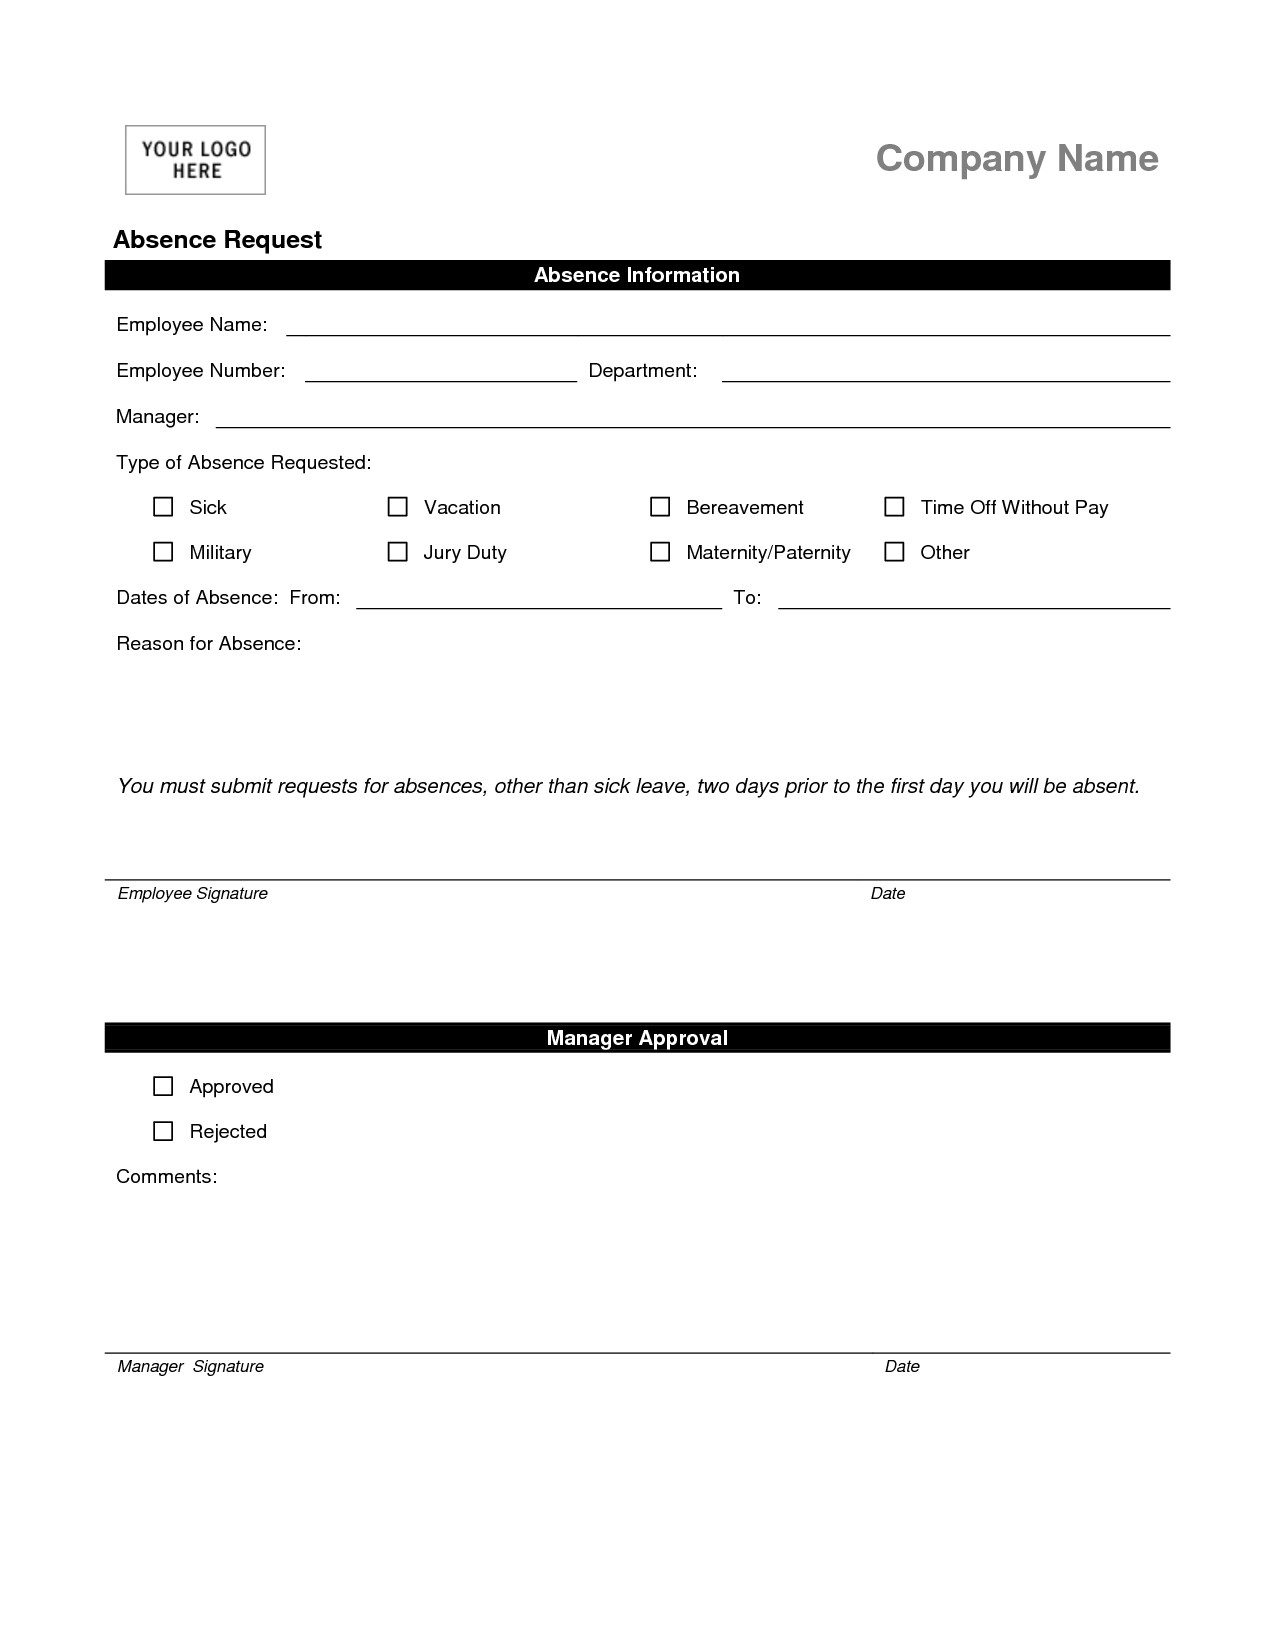 Formatted new Absentee Forms and Templates